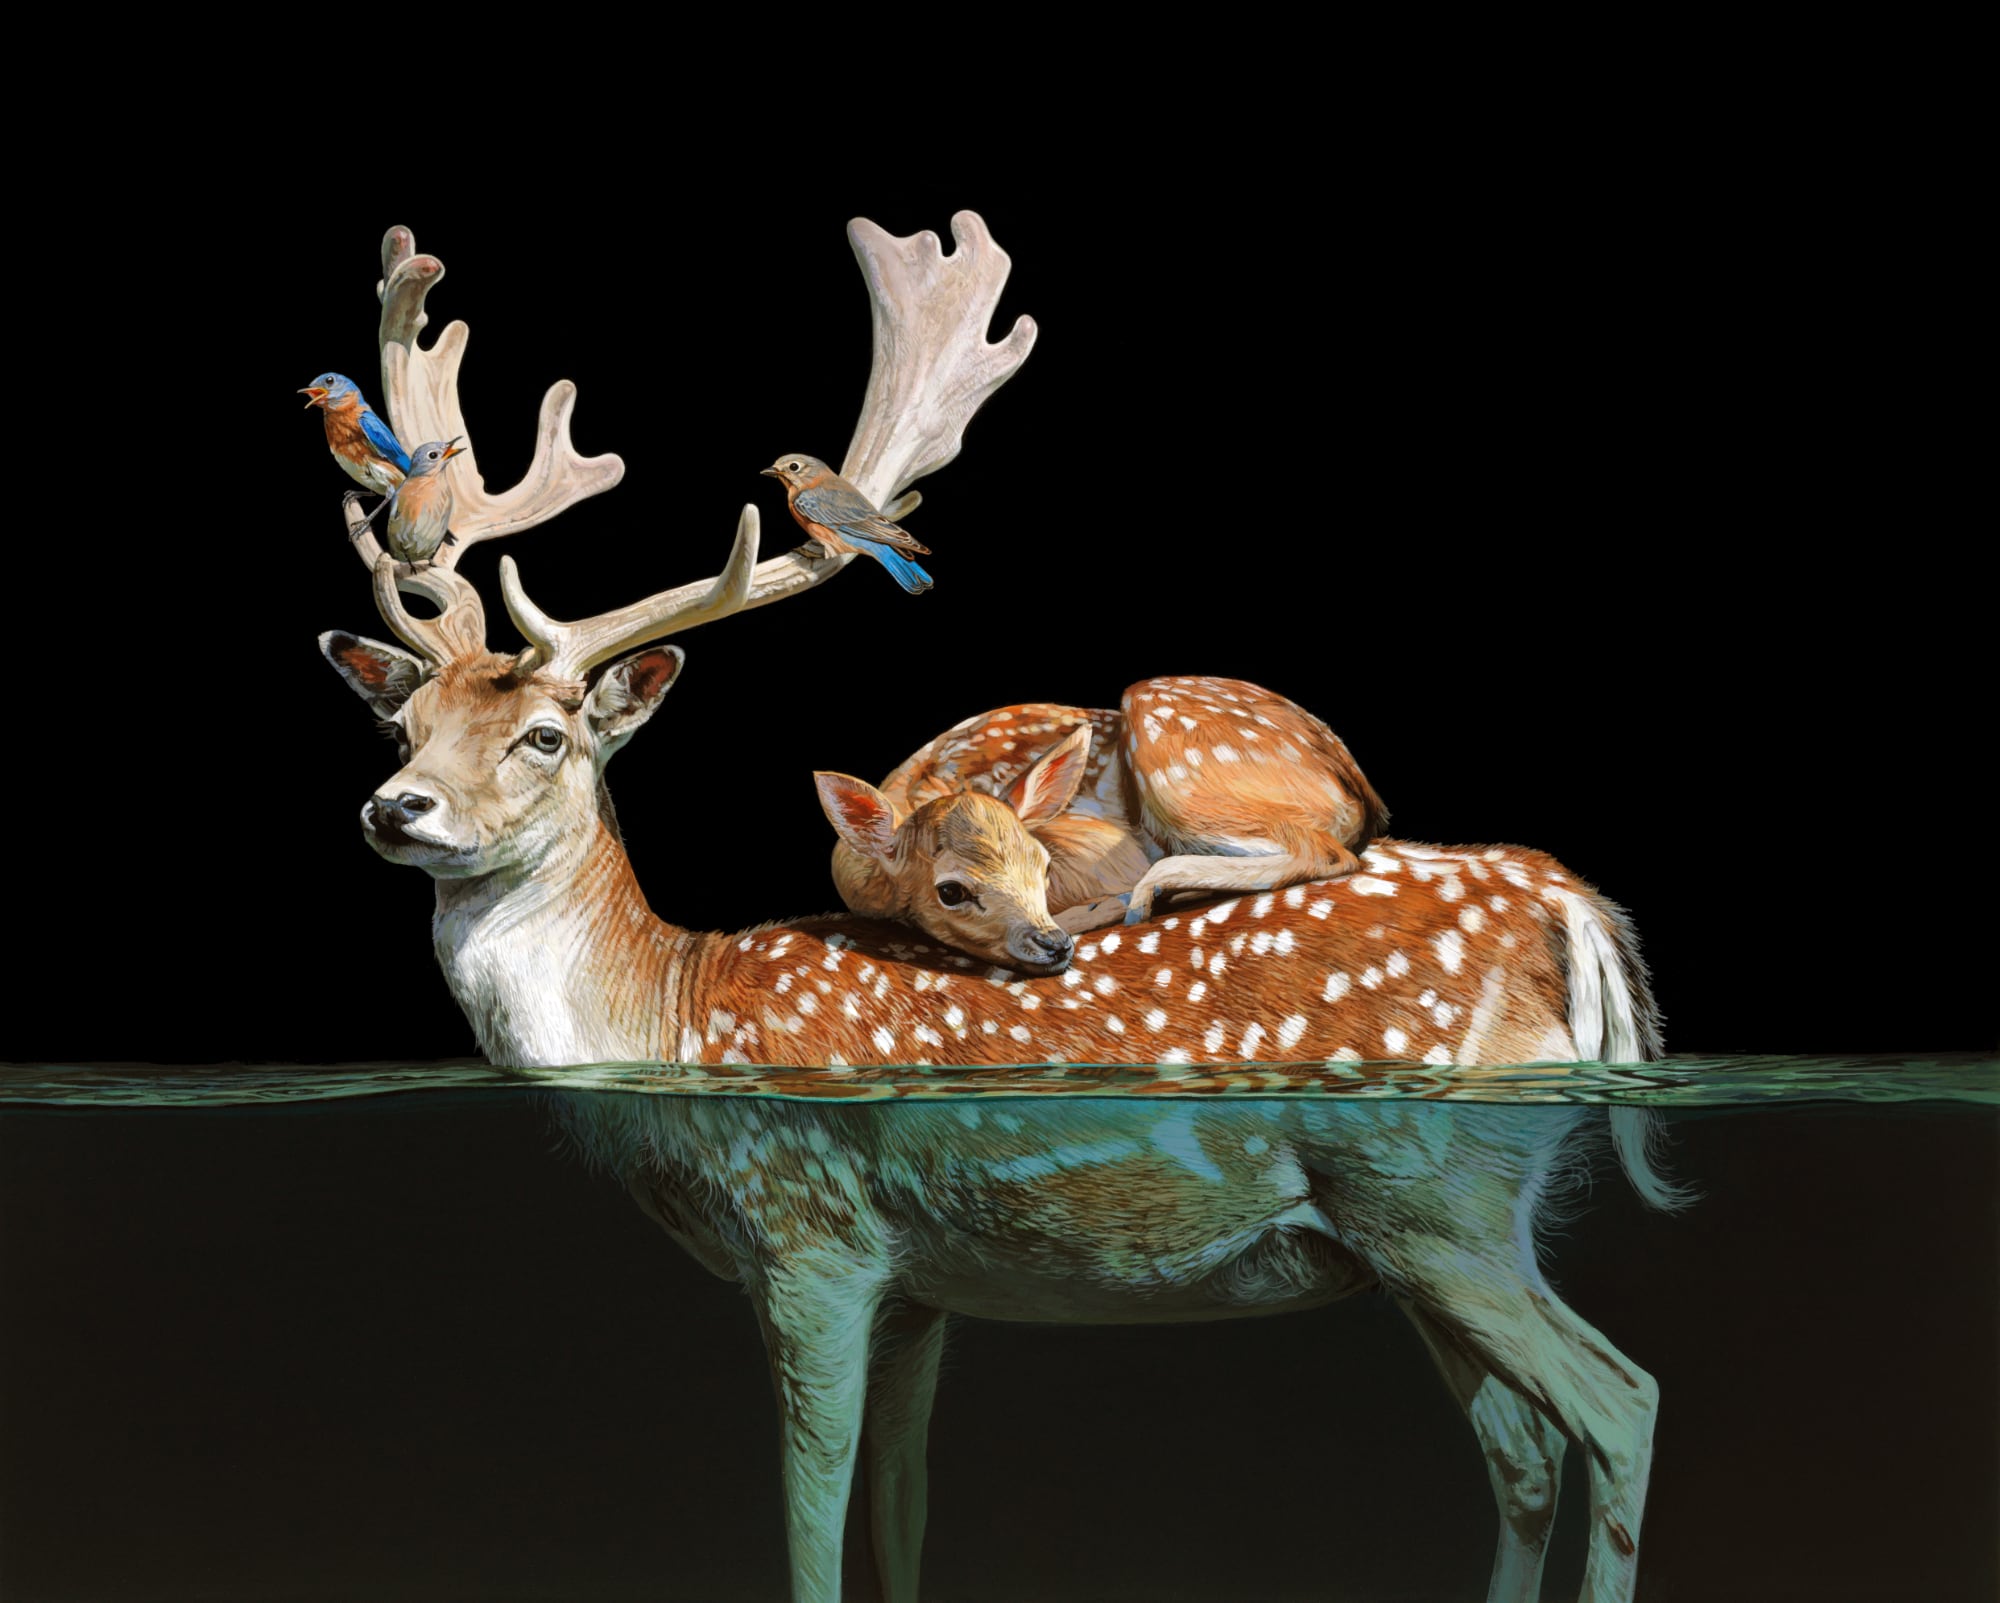 a fawn curls up on its mother's back with birds in her antlers. water rises to her midsection